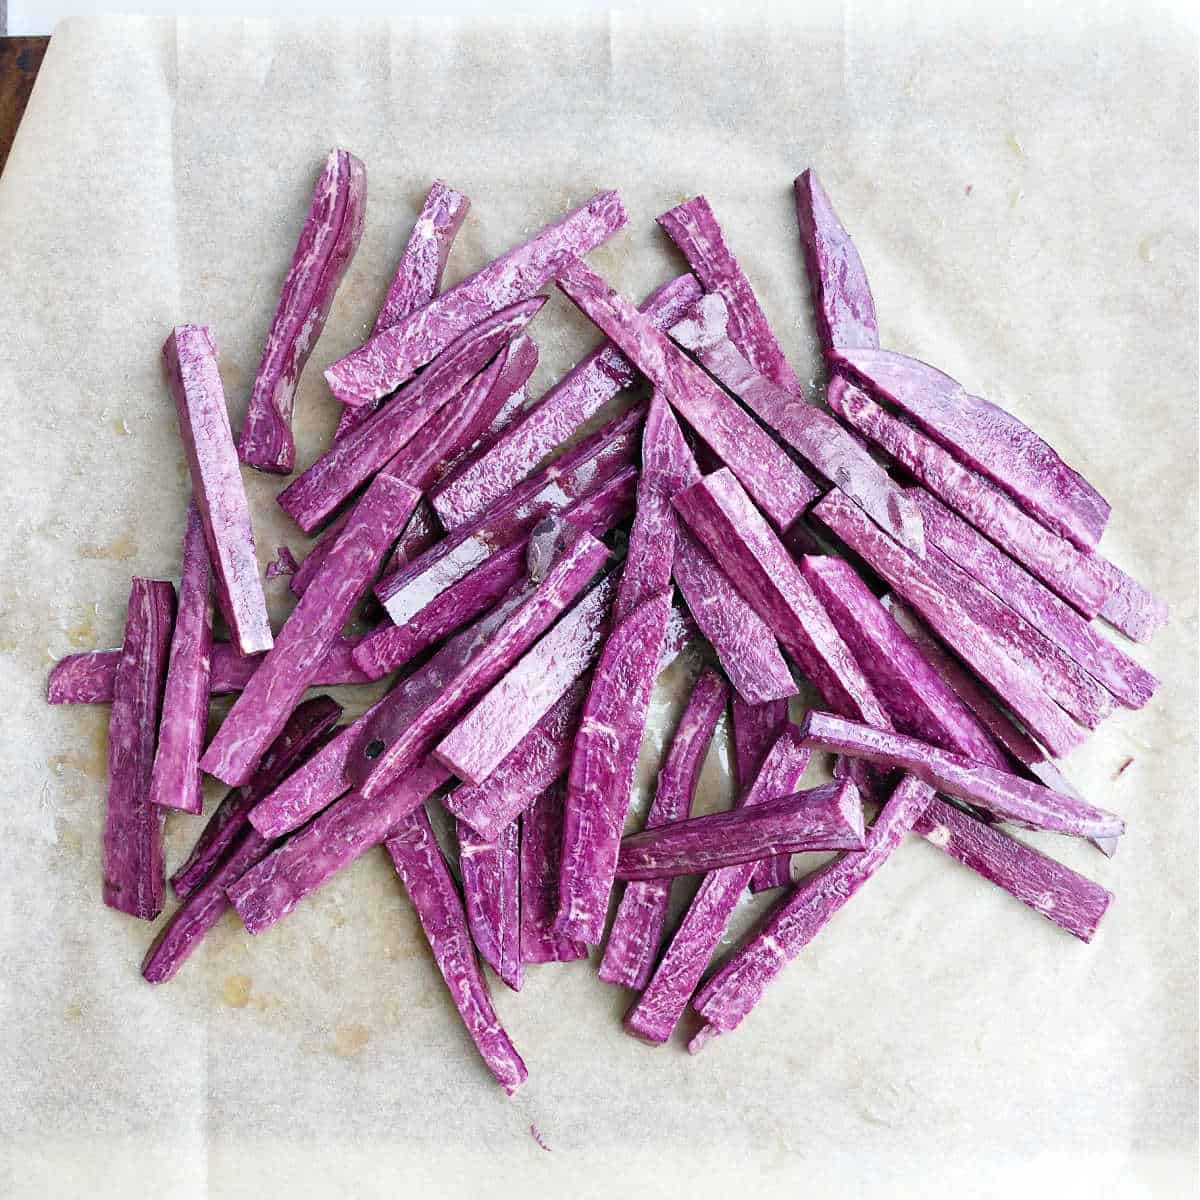 purple potato sticks tossed with olive oil on the center of parchment paper